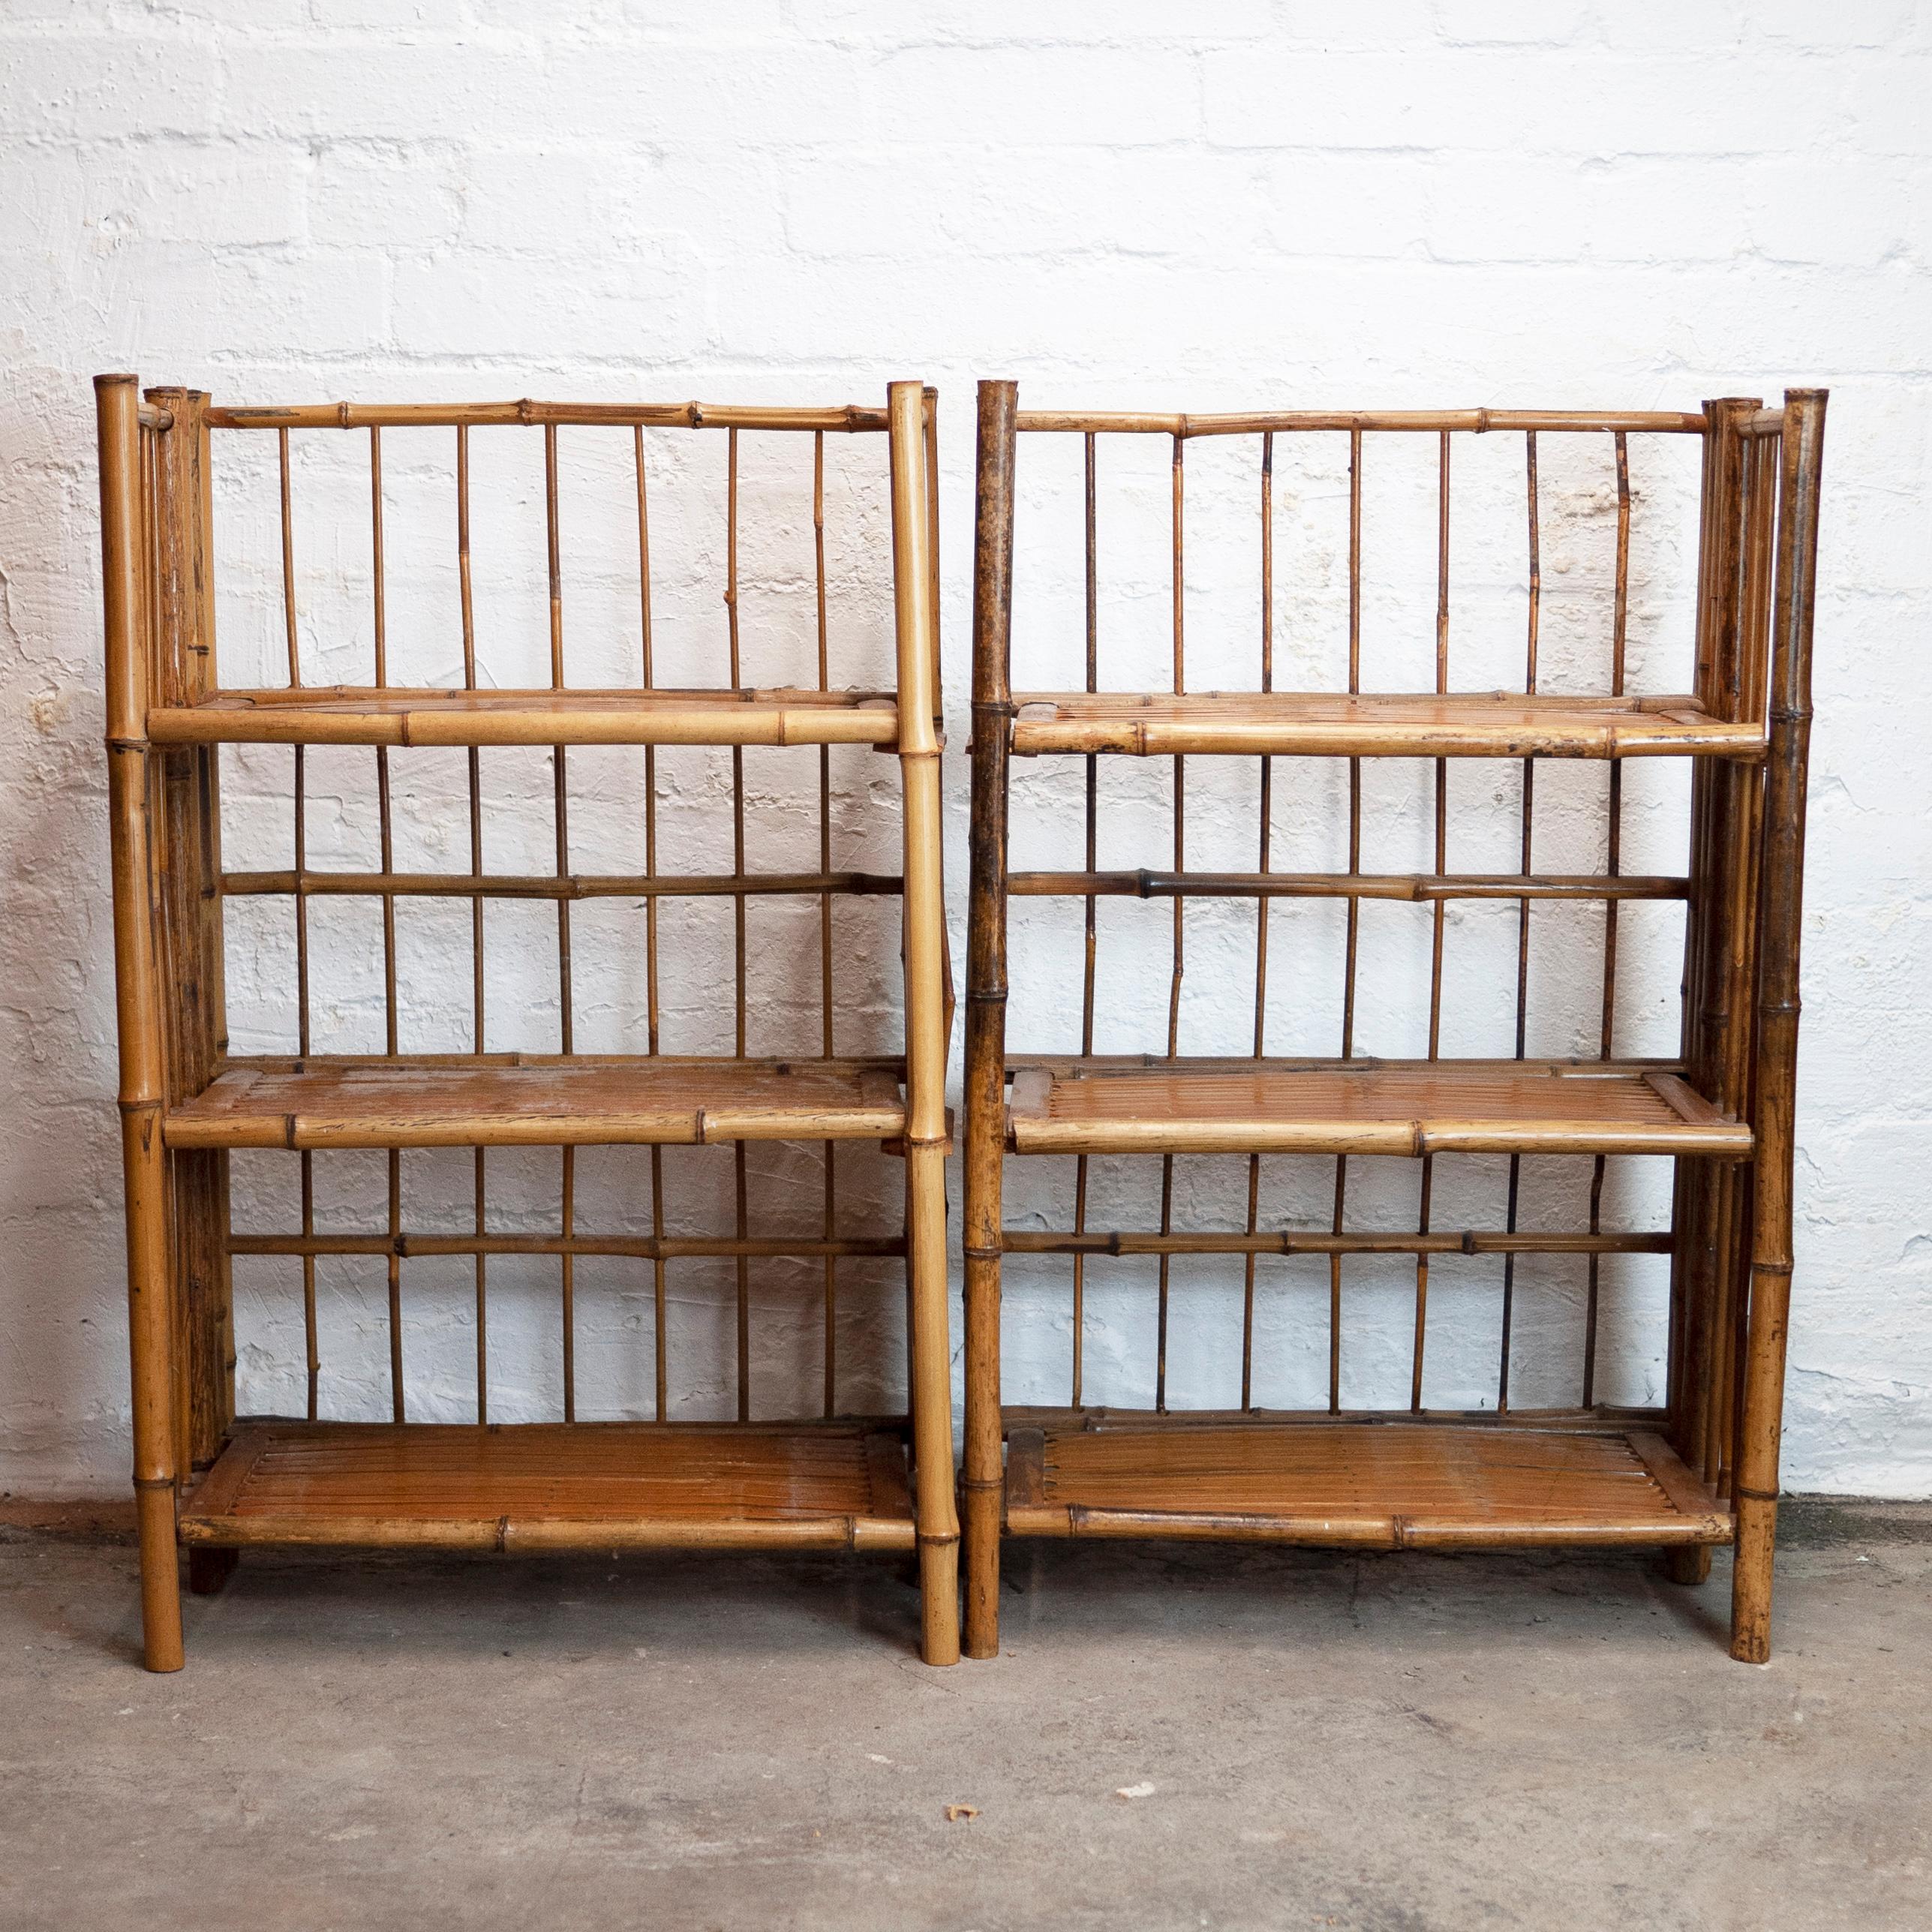 A pair of vintage folding bamboo 3 tier shelves.

Design Period - 1930 to 1939

Style - Vintage

Detailed Condition - Good with minimal defects

Restoration and Damage Details - Light wear consistent with age and use

Materials -